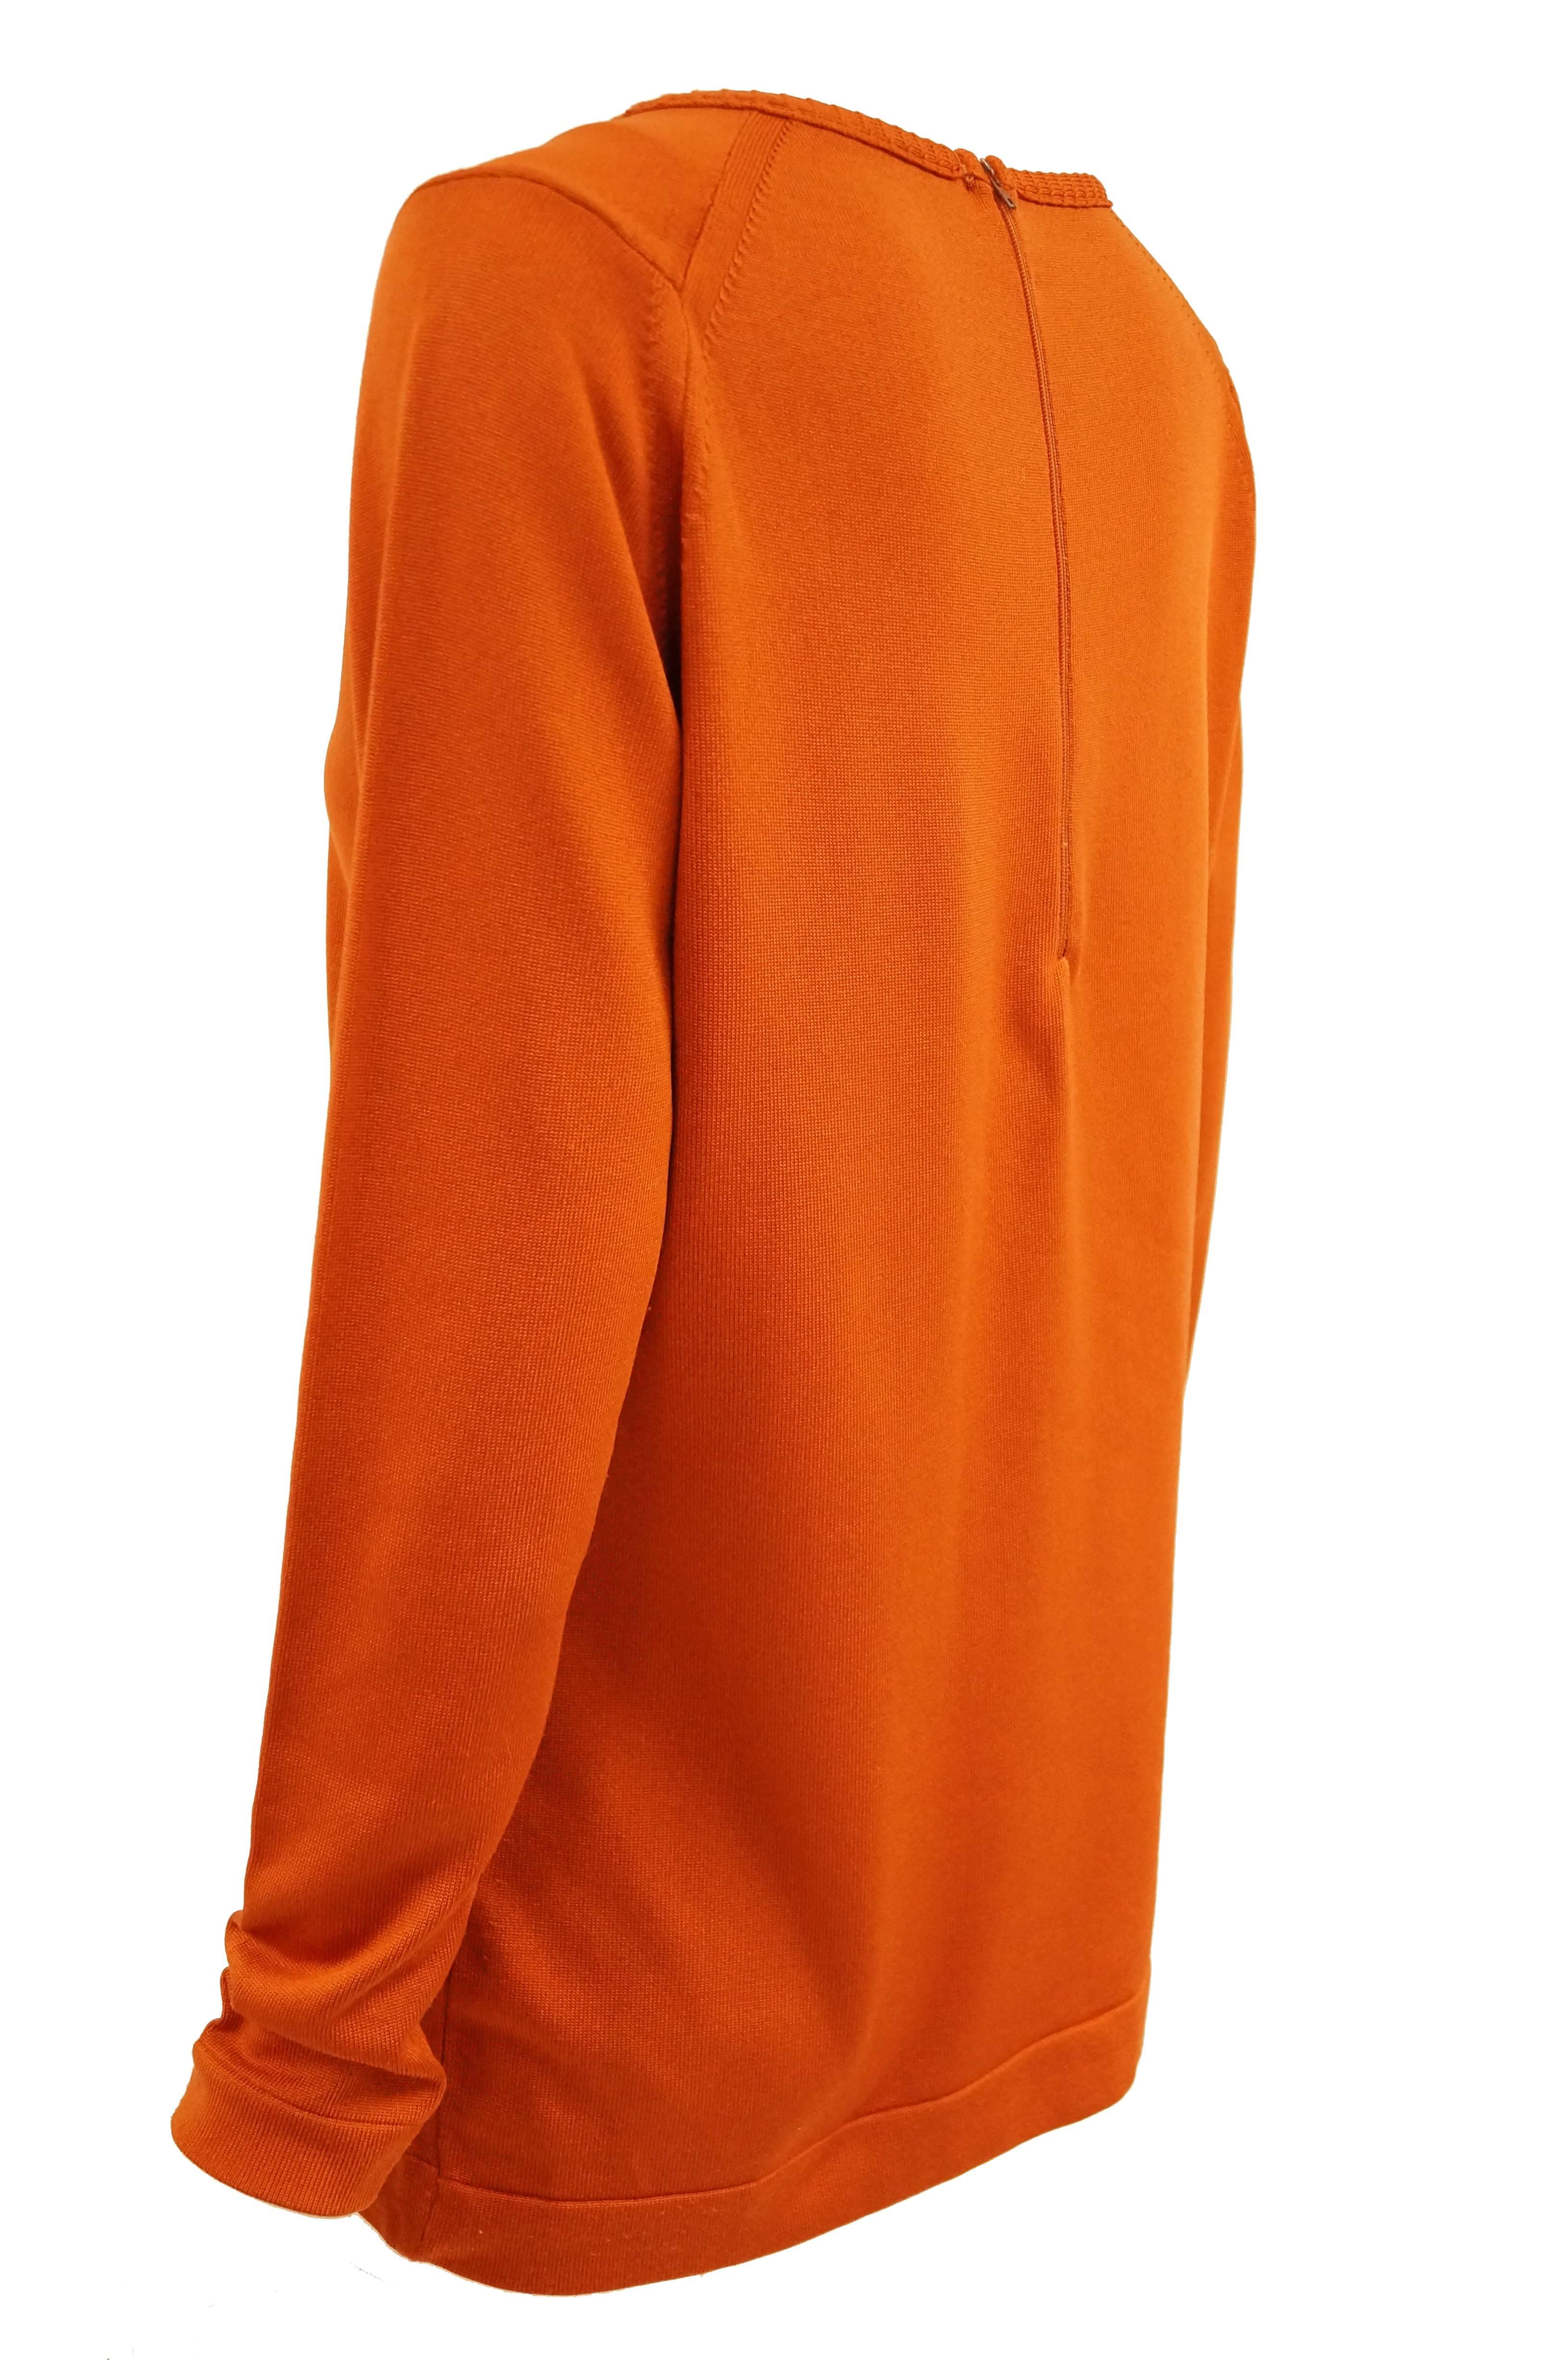 Givenchy Sport Tangerine Orange Pullover Sweater, 1970s  1